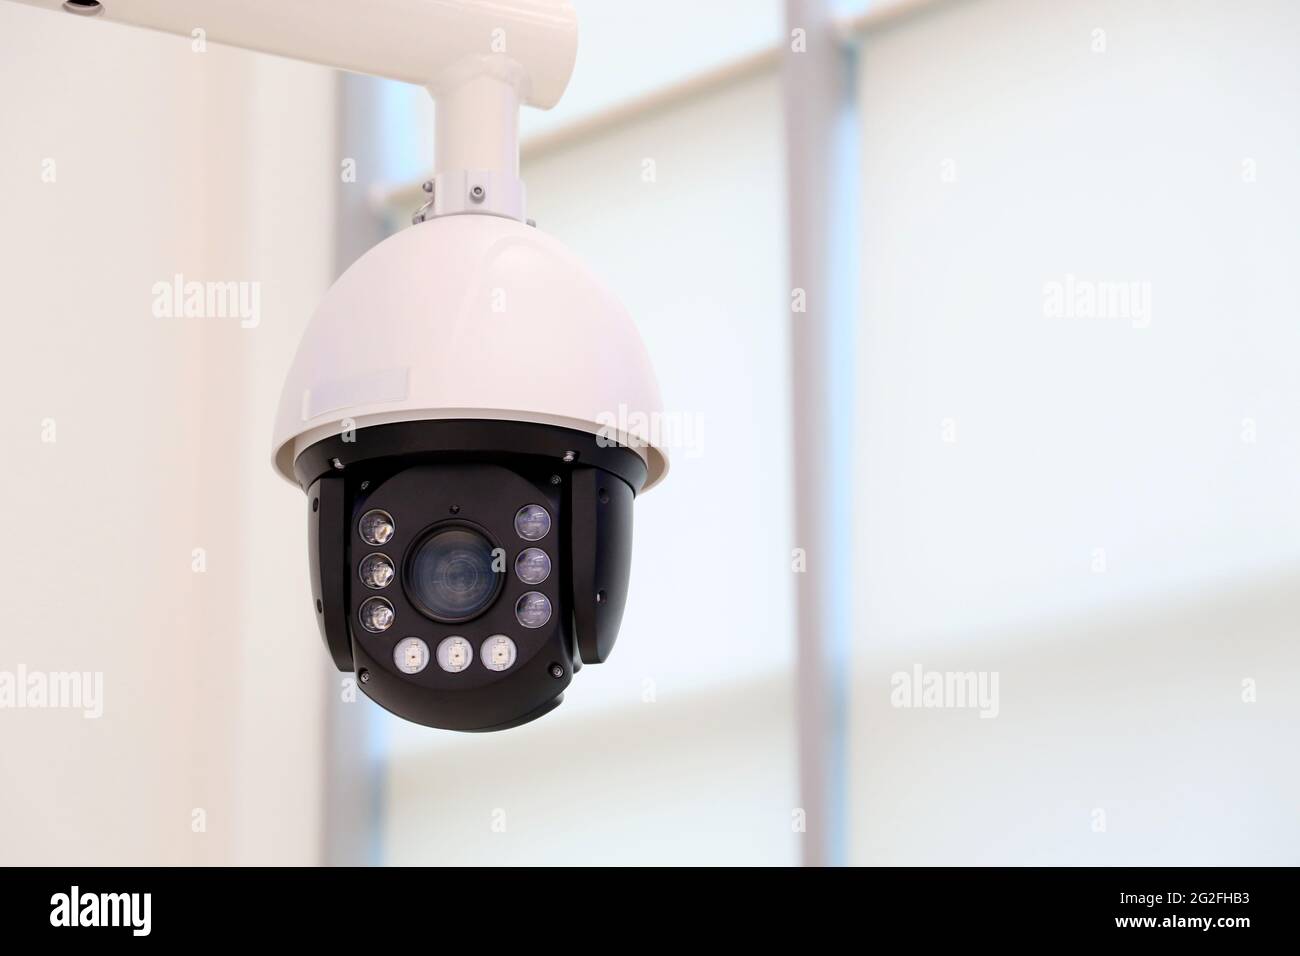 Surveillance video camera with led backlight on white background. Cctv camera, concept for security and protection from crime Stock Photo